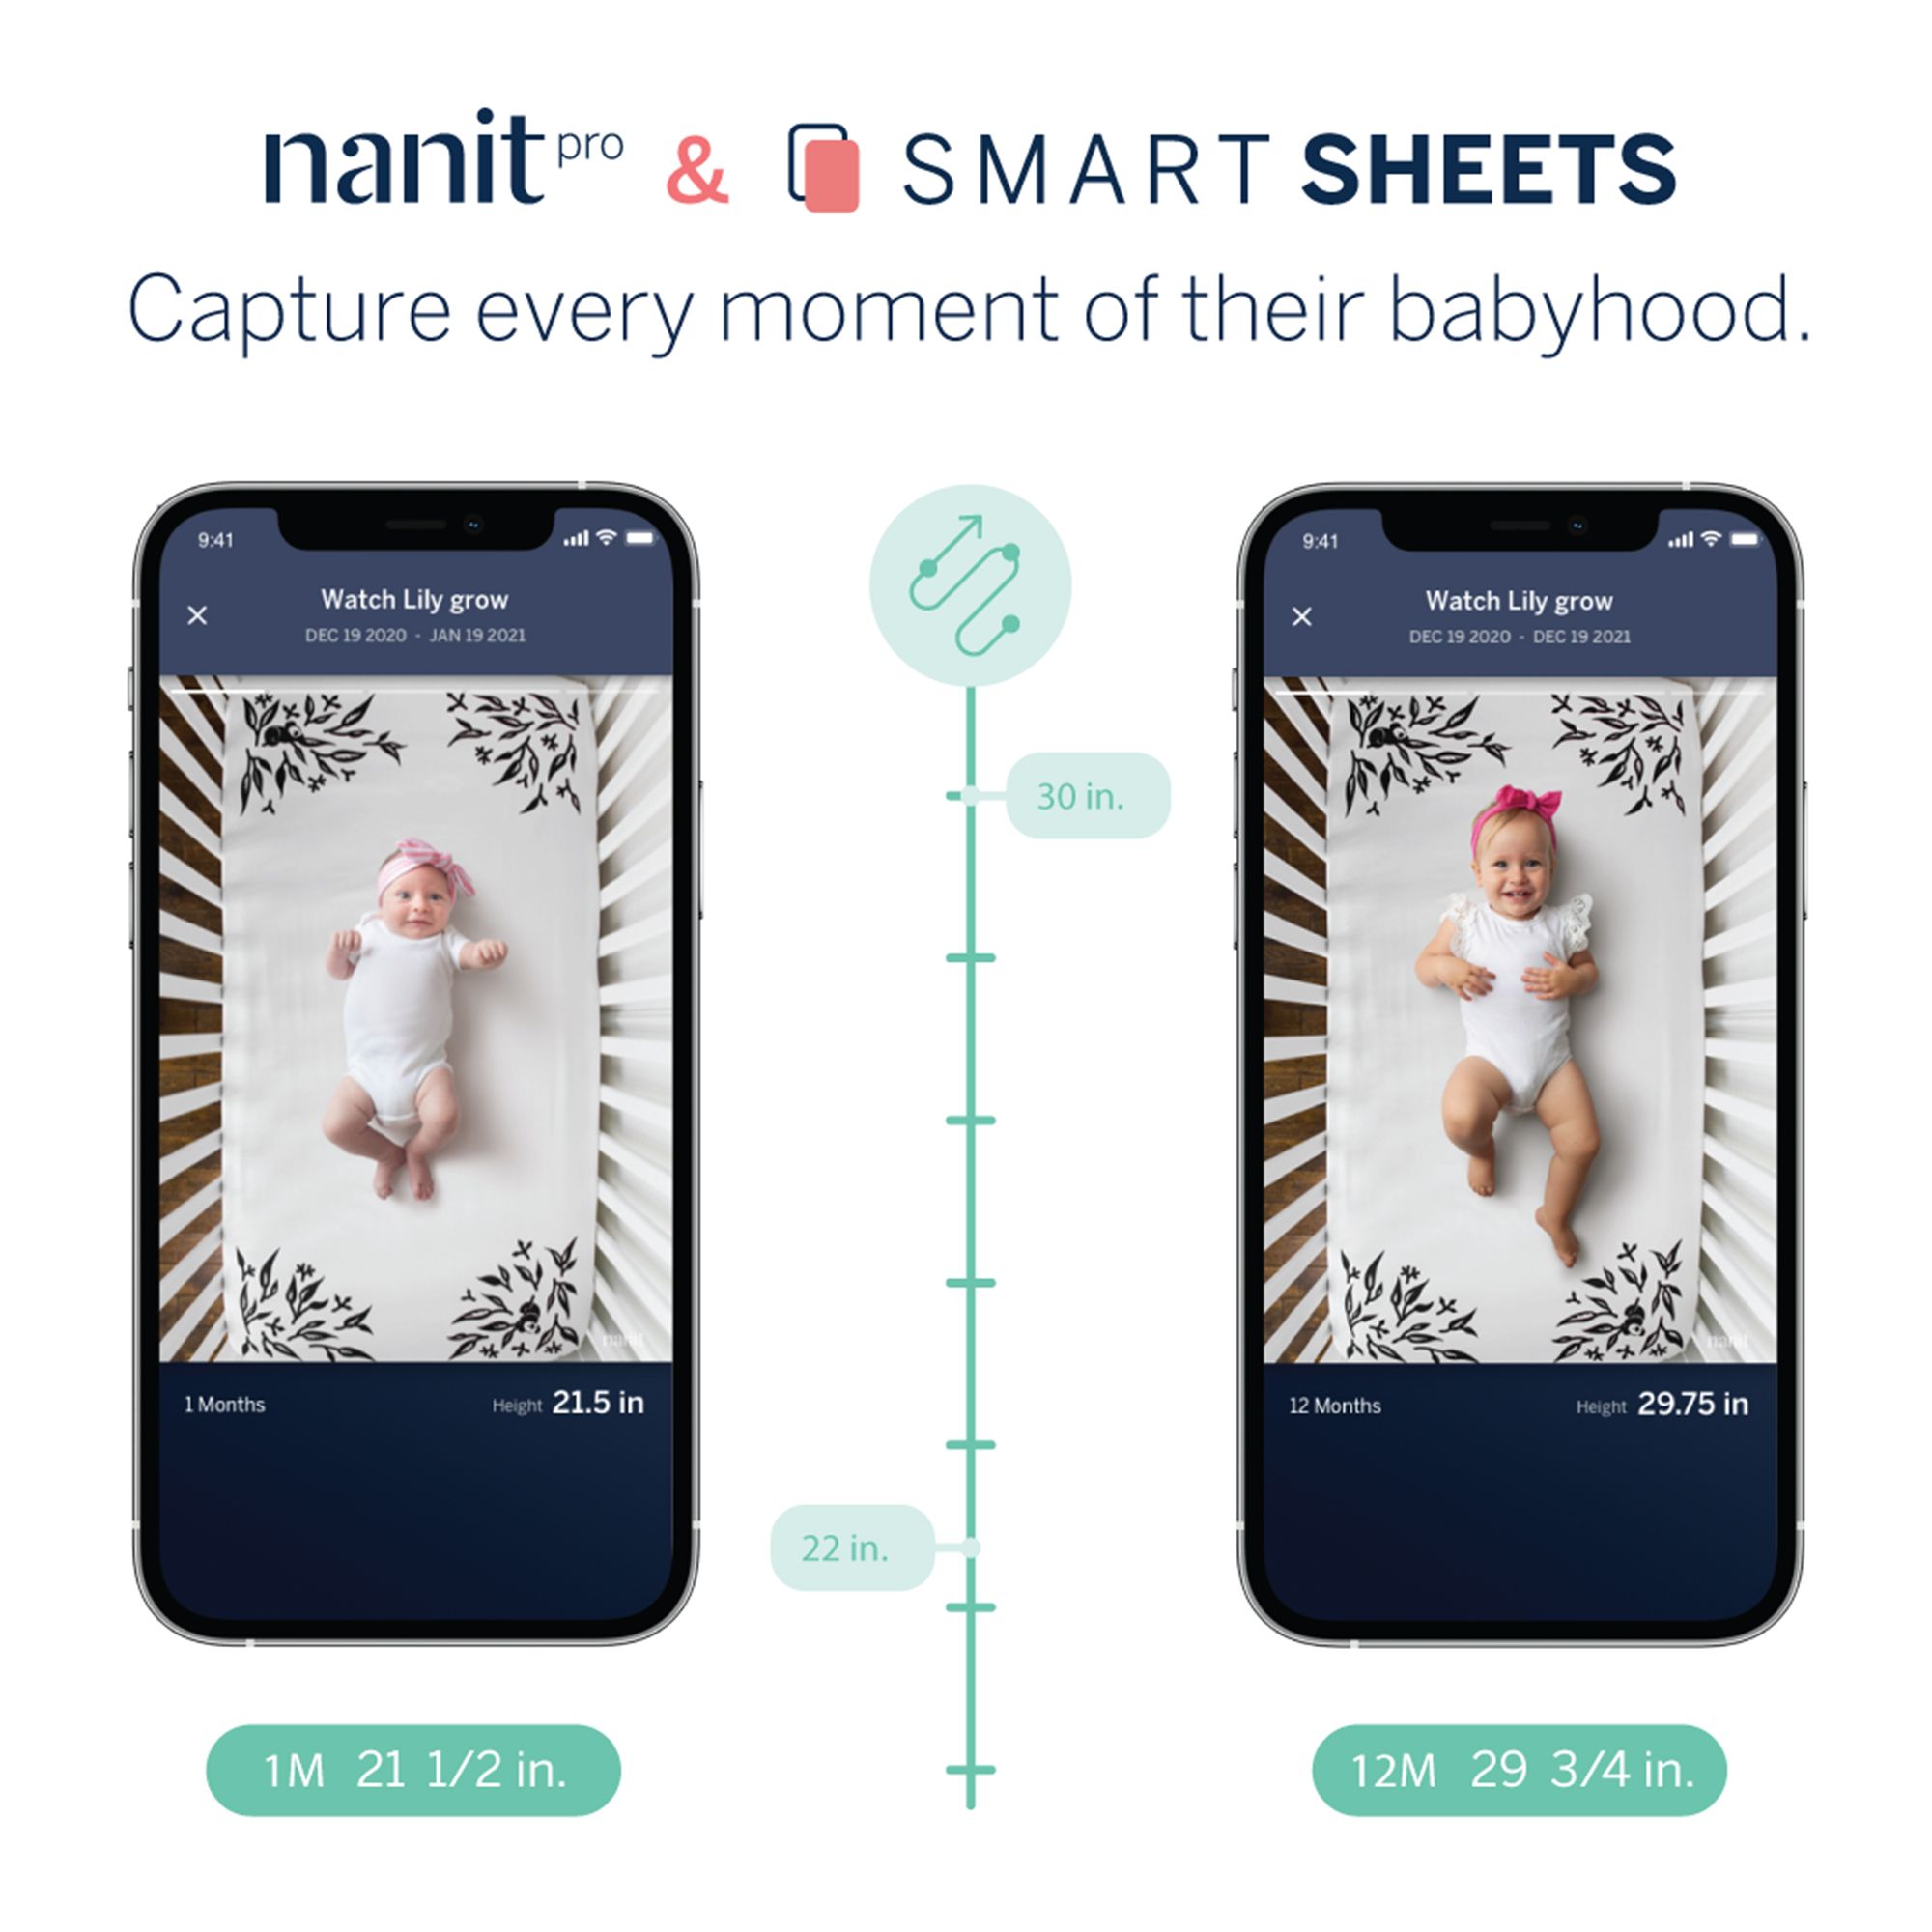 Nanit Pro Complete Baby Monitoring System